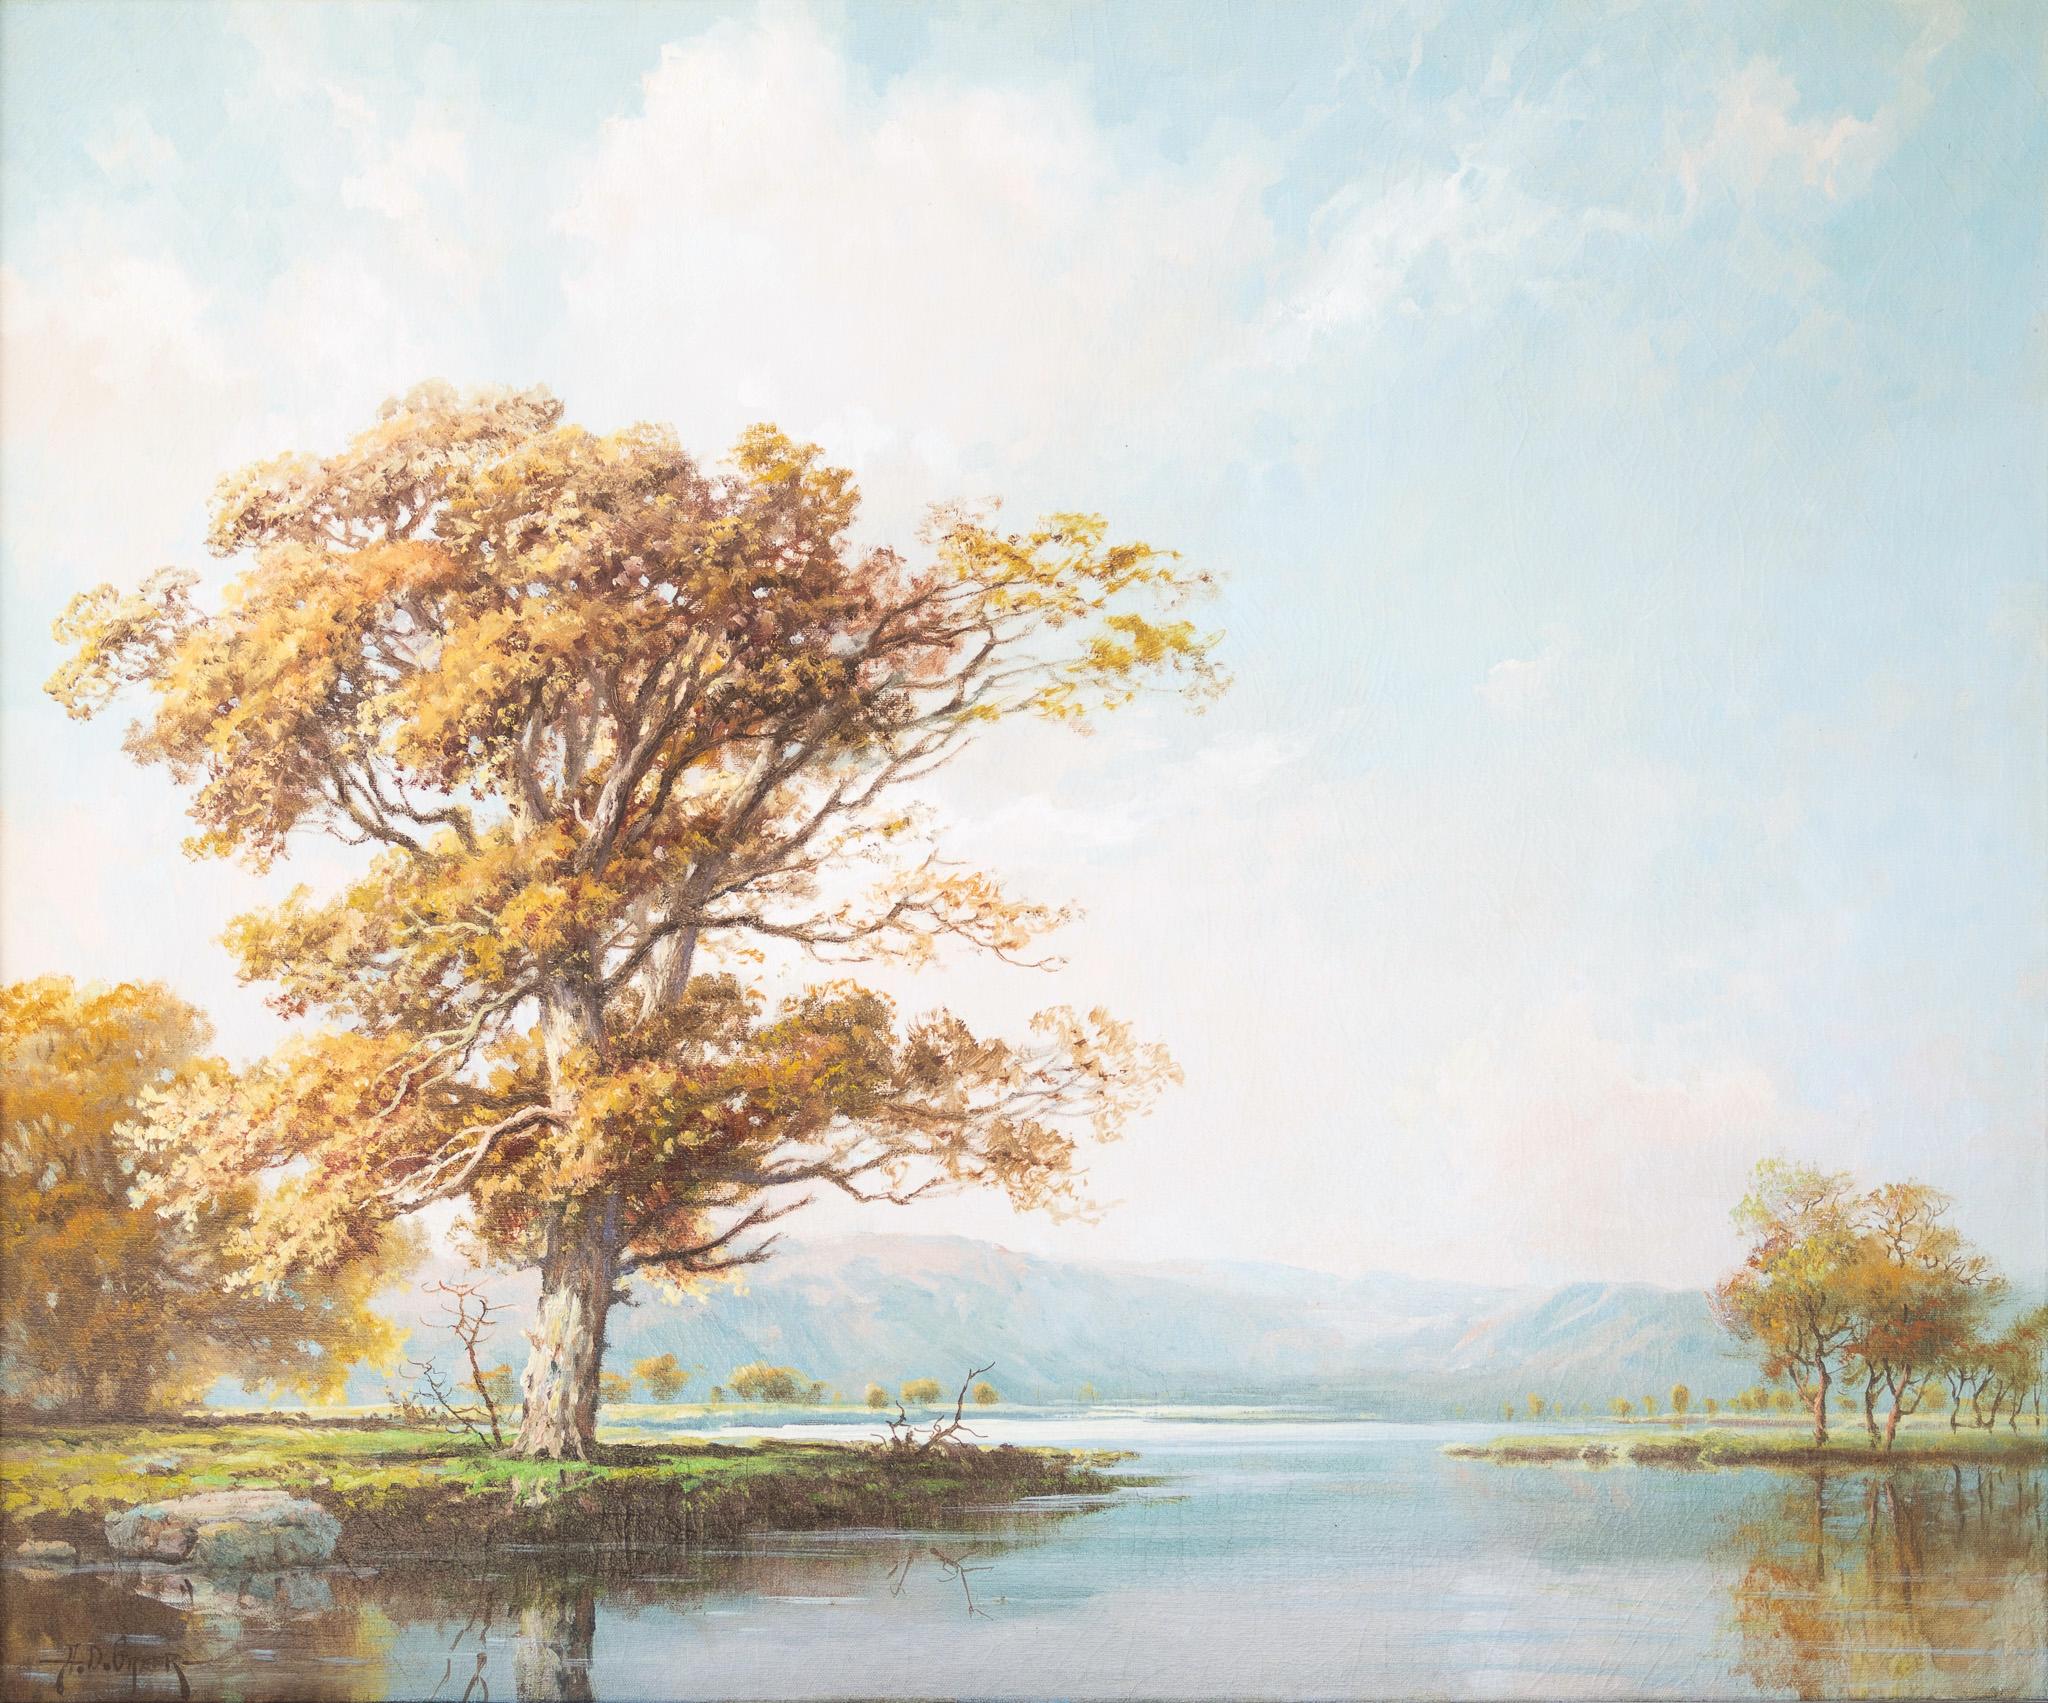 A.D. Greer Landscape Painting - "Lakeside in Autumn"